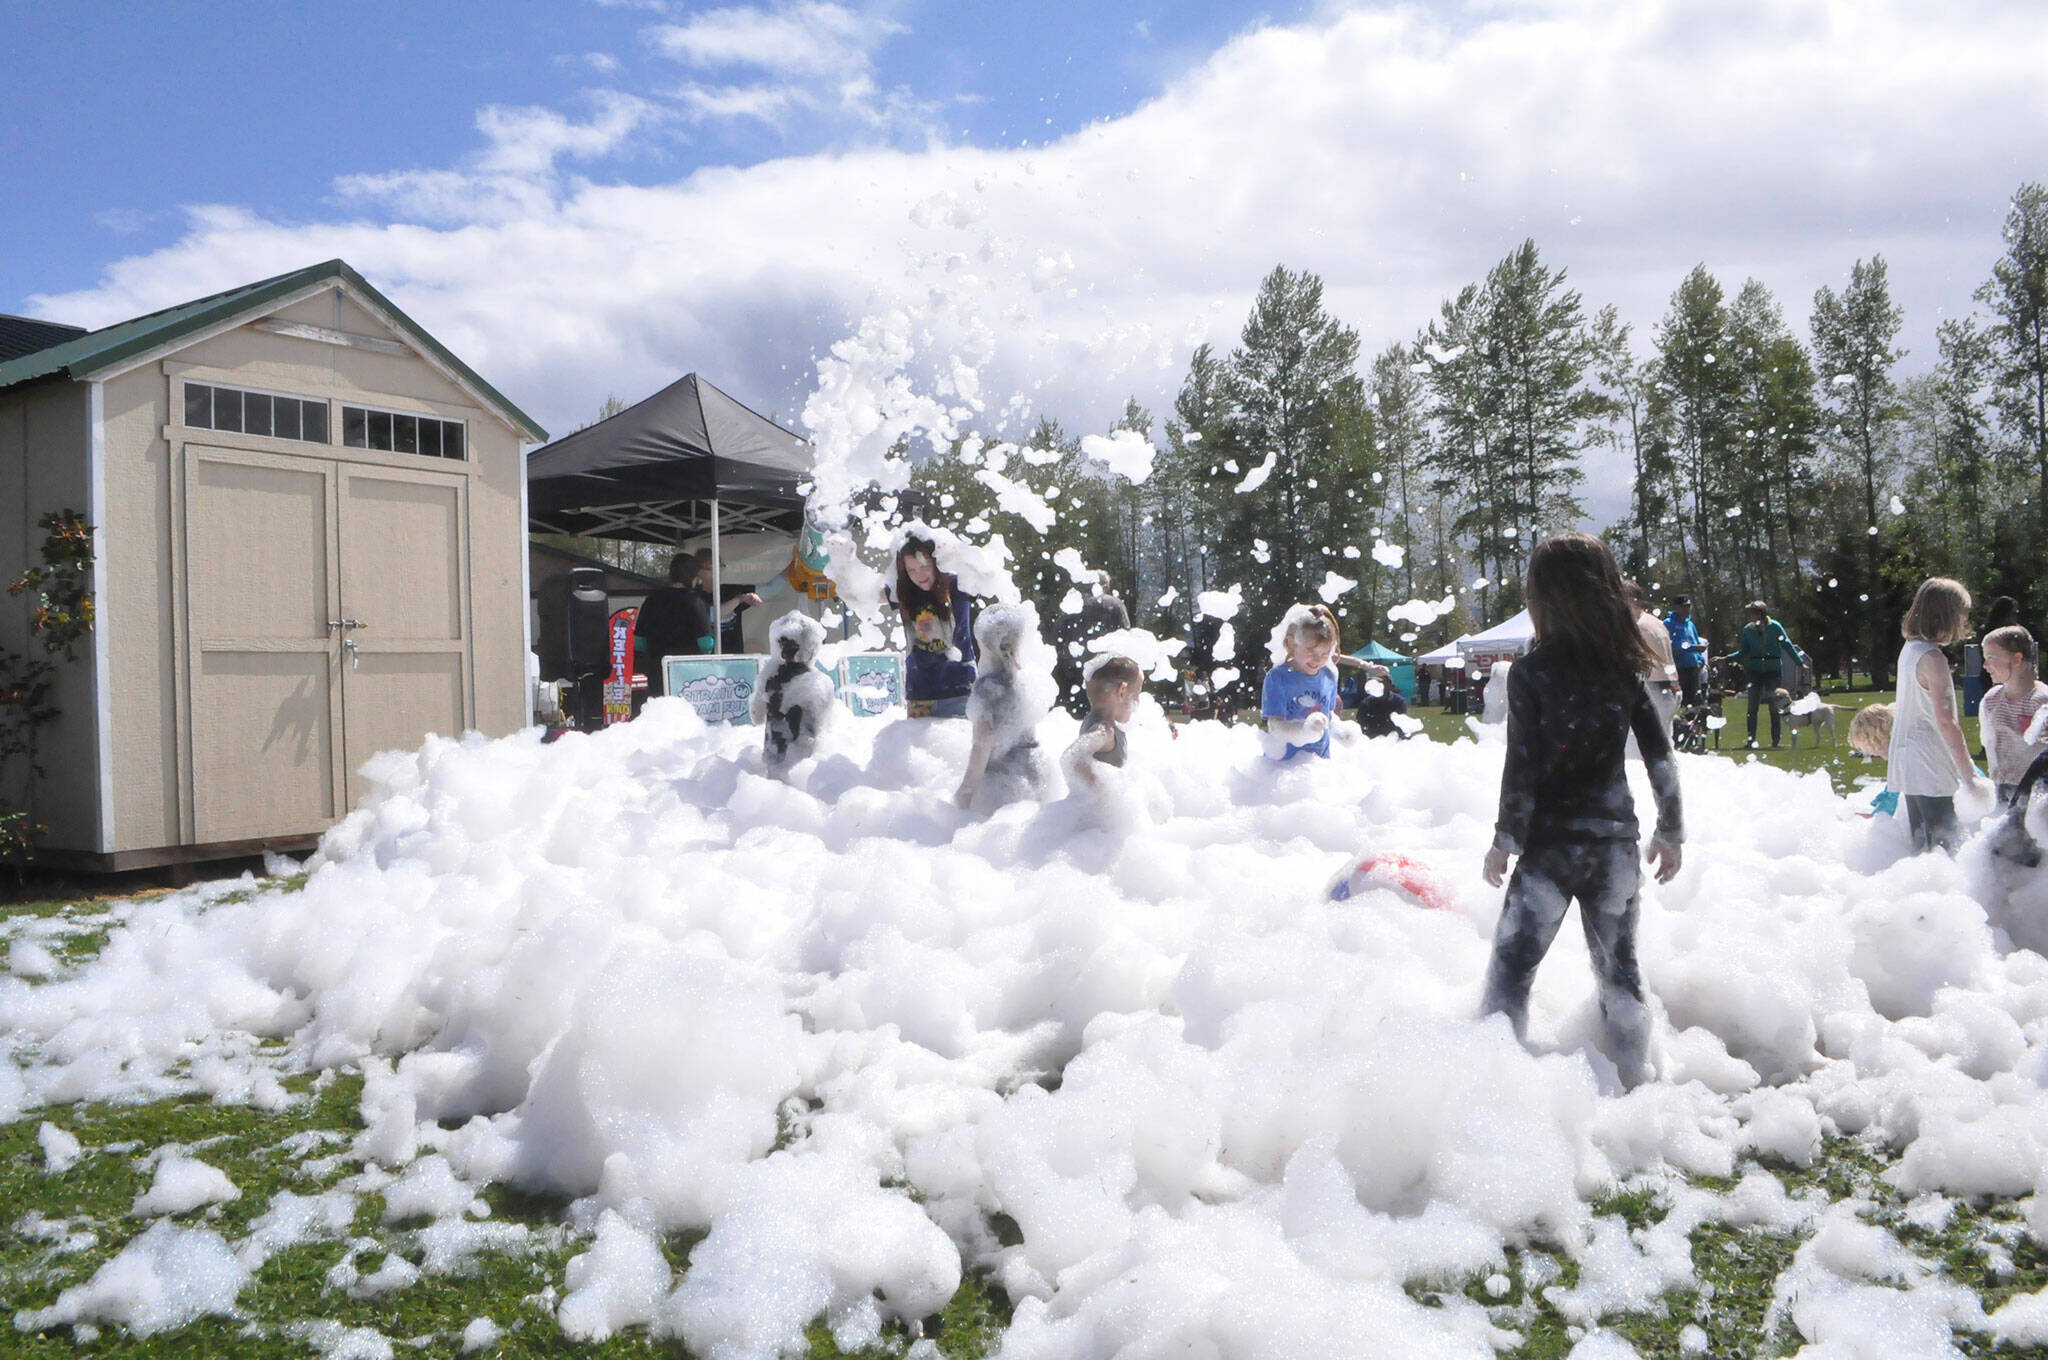 Sequim Gazette photo by Matthew Nash/ As part of Family Fun Days, Strait Up Foam Fun came to Carrie Blake Community Park on Sunday offering children and adults the chance to play in the eco-friendly, biodegradable foam for hours.